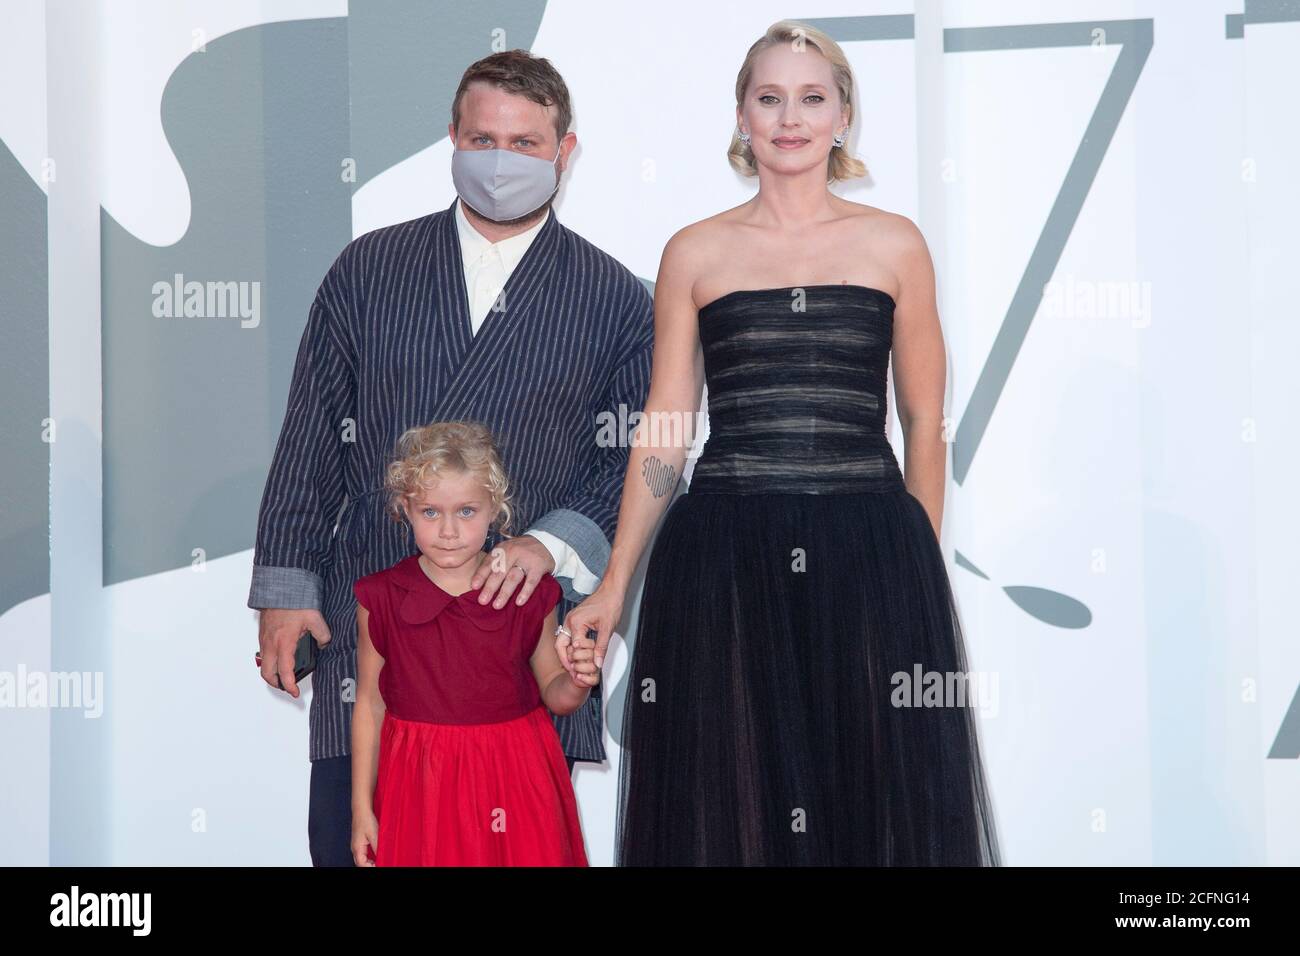 Venice, Italy. 06th Sep, 2020. Mona Fastvold, Adelaide James Fastvold Corbet, Brady Corbet, The World To Come Premiere, 77th Venice Film Festival in Venice, Italy on September 06, 2020. Photo by Ron Crusow/imageSPACE Credit: Imagespace/Alamy Live News Stock Photo